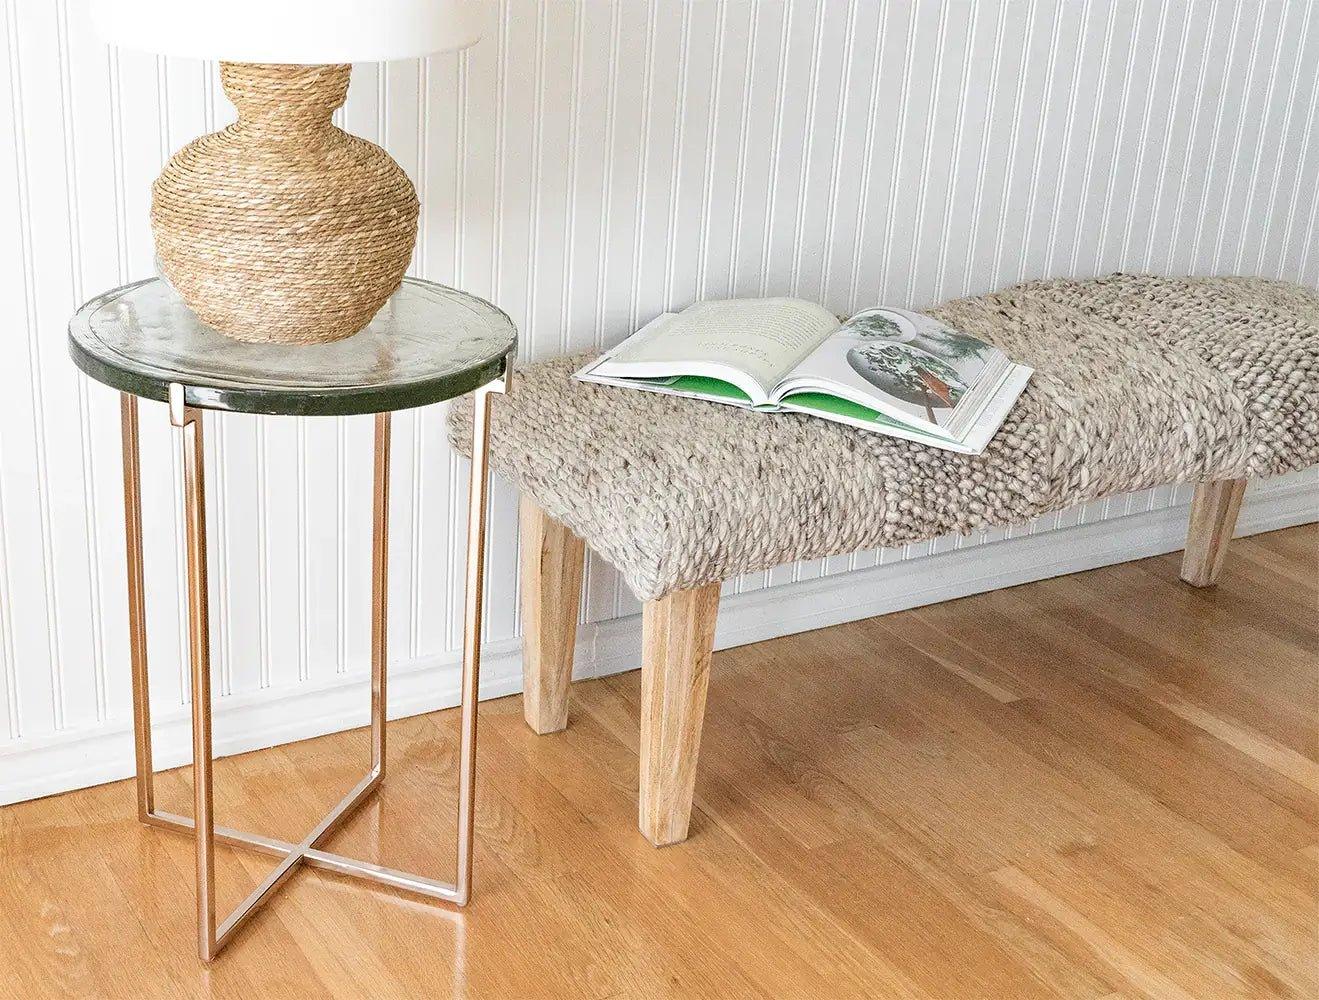 Handwoven Textured Taupe Dining Bench - Nature Home Decor